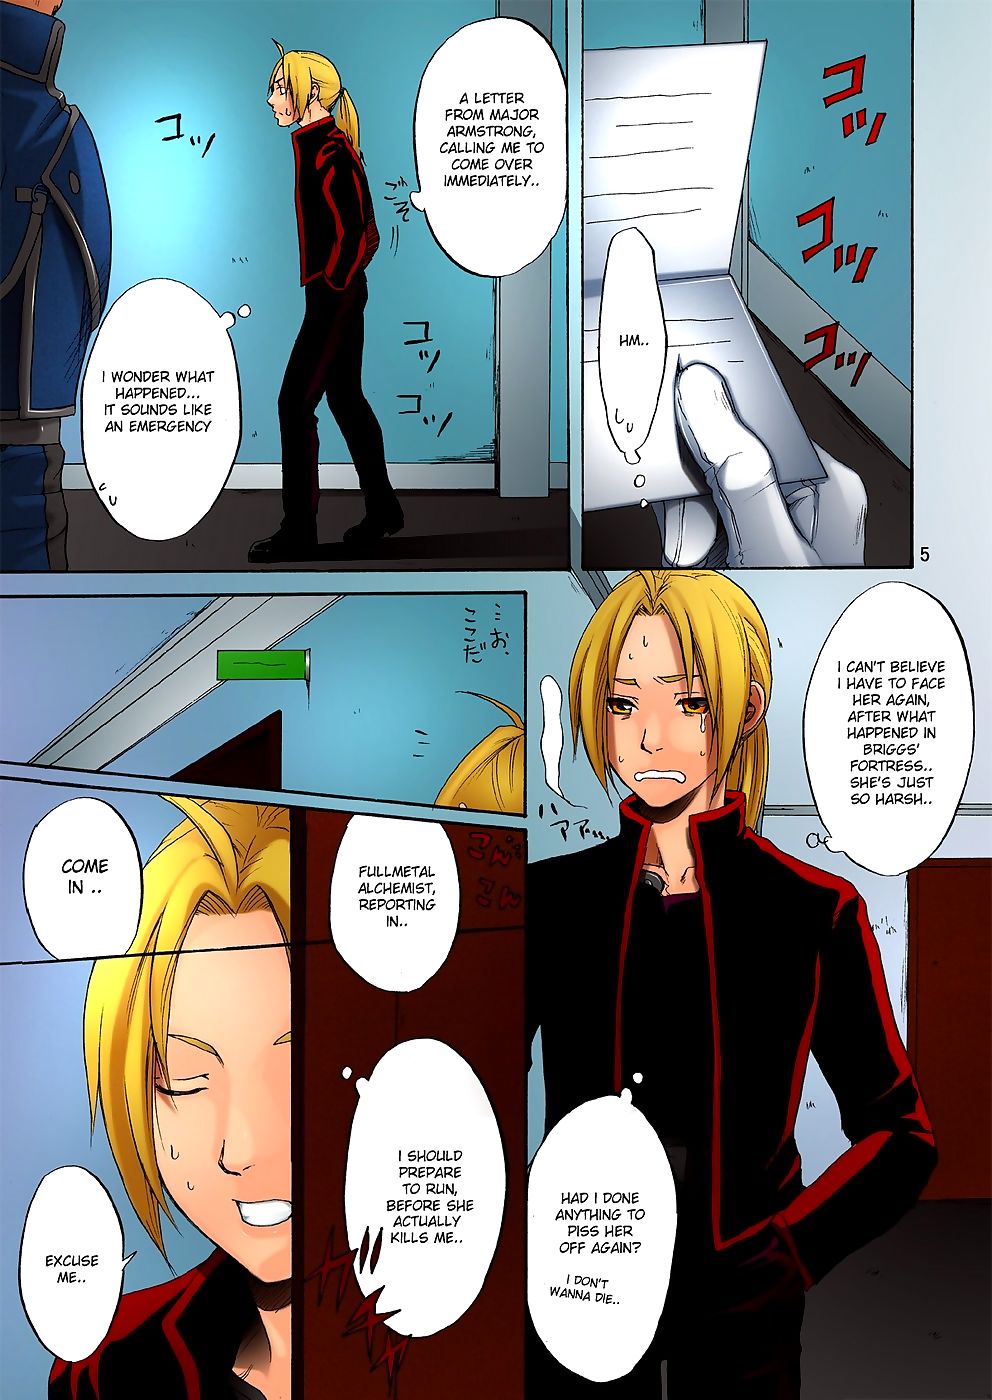 Doujinshi Superior is Get Email trainer page 1